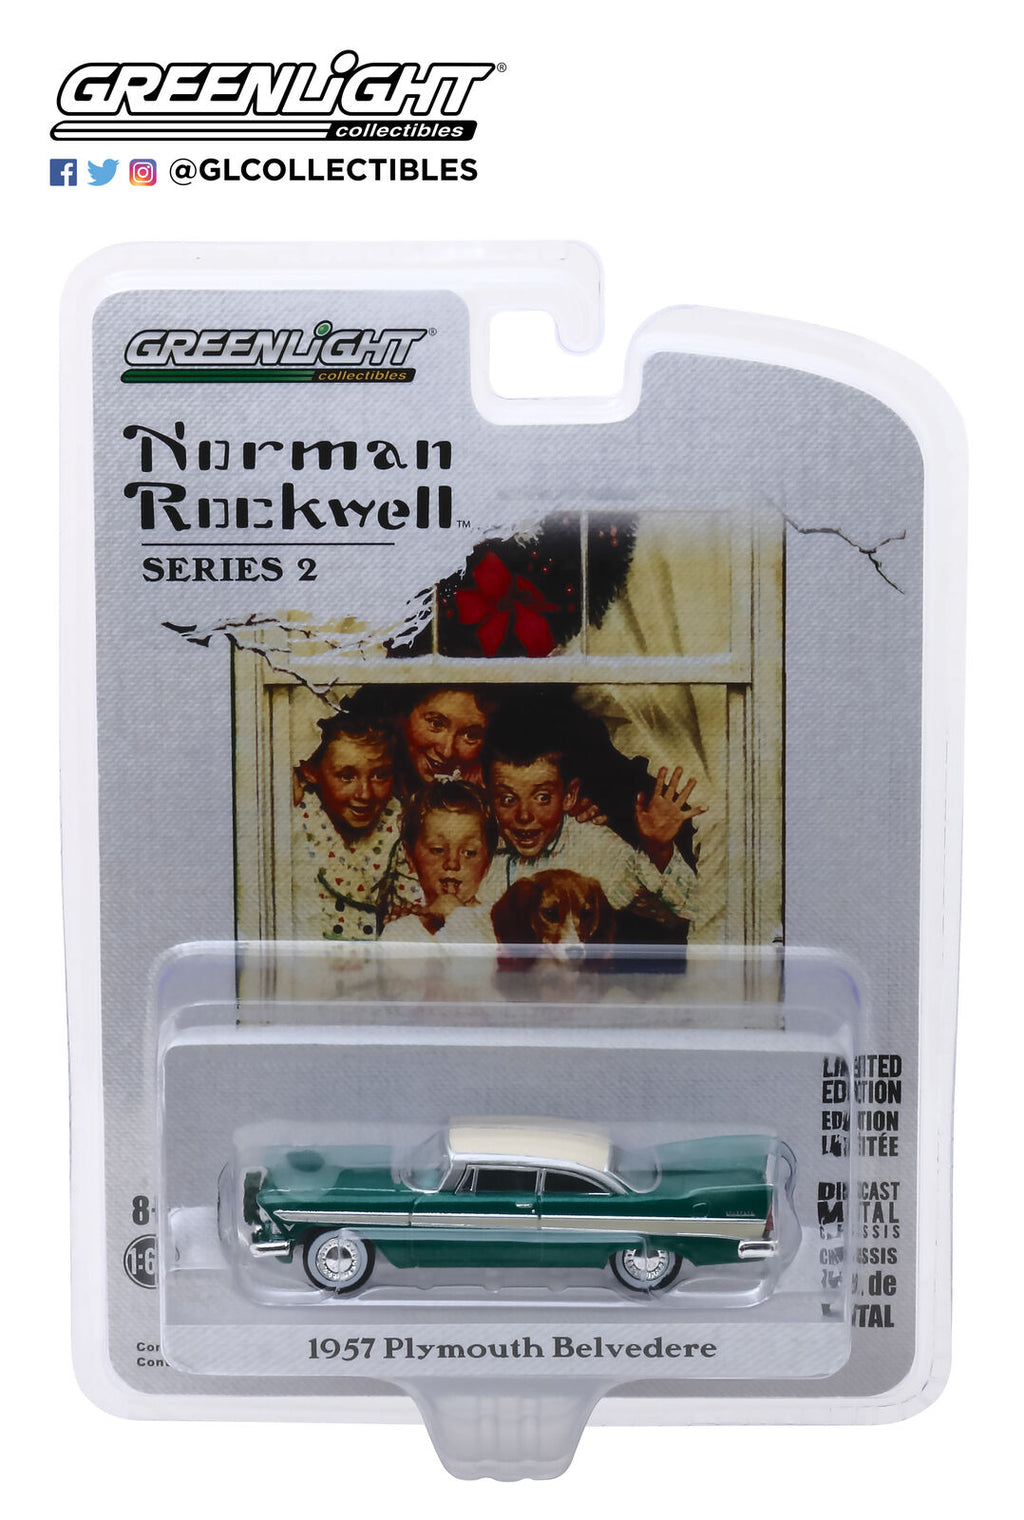 Greenlight 1:64 Norman Rockwell Series 2 1957 Plymouth Belvedere